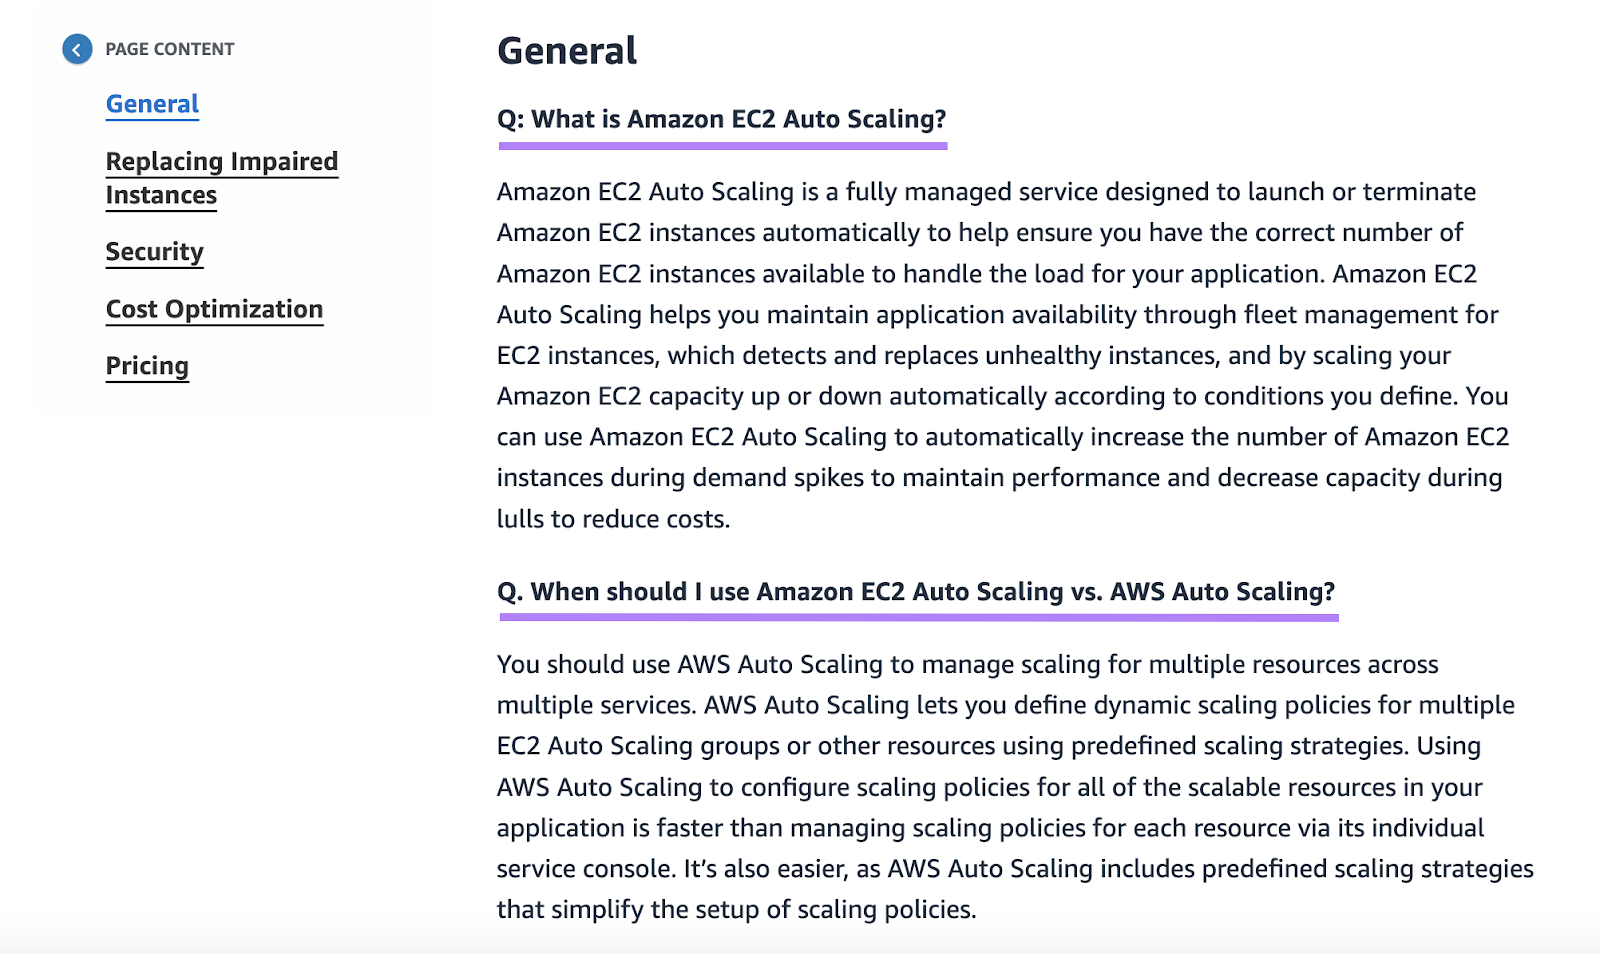 Questions about amazon auto scaling ،uct answered on separate page